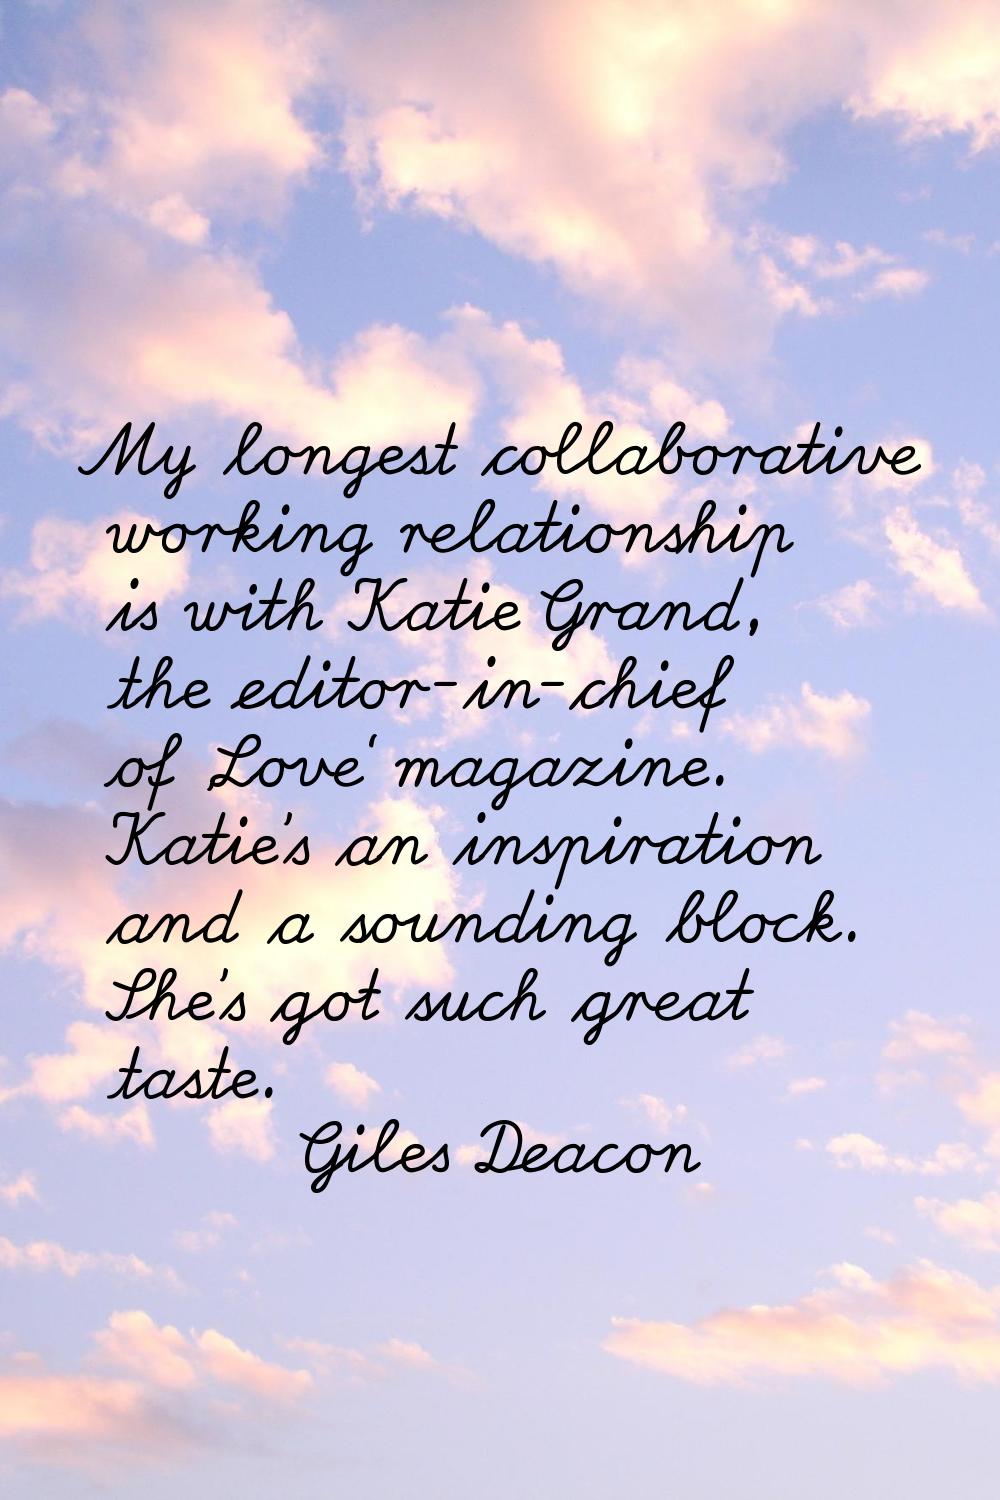 My longest collaborative working relationship is with Katie Grand, the editor-in-chief of 'Love' ma